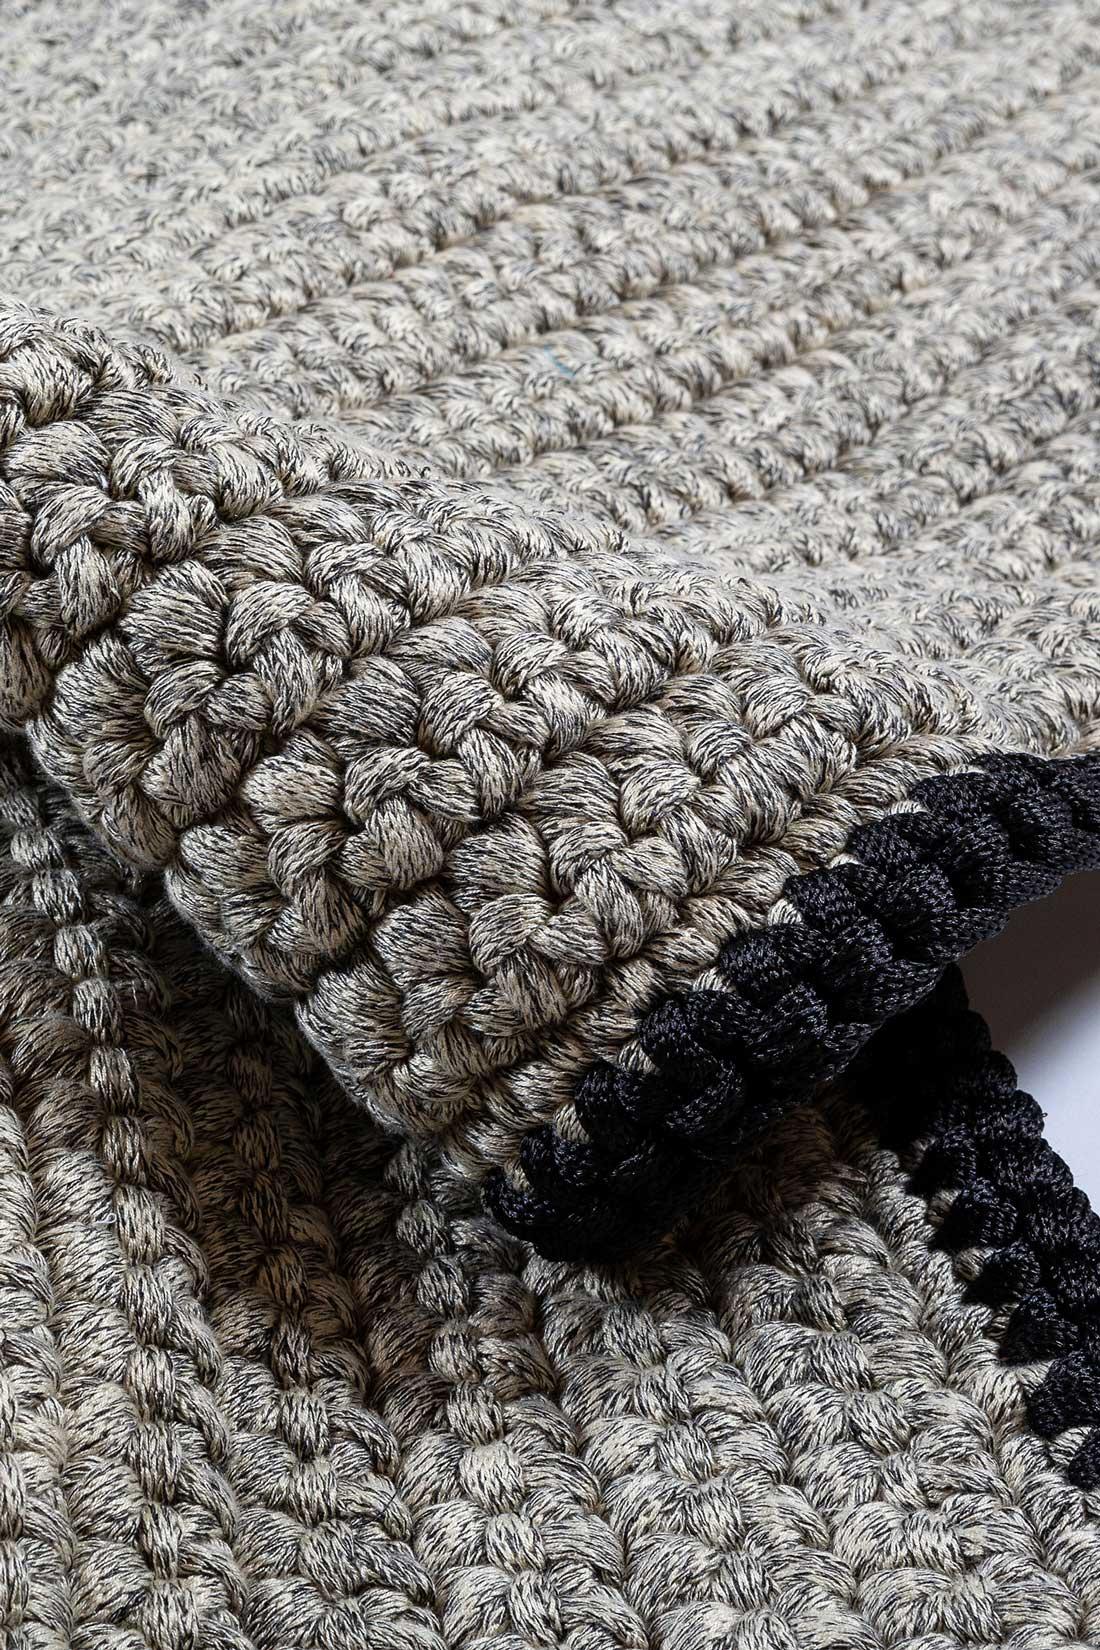 Israeli Handmade Crochet Thick Rug in Grey Beige Black Made of Cotton & Polyester For Sale